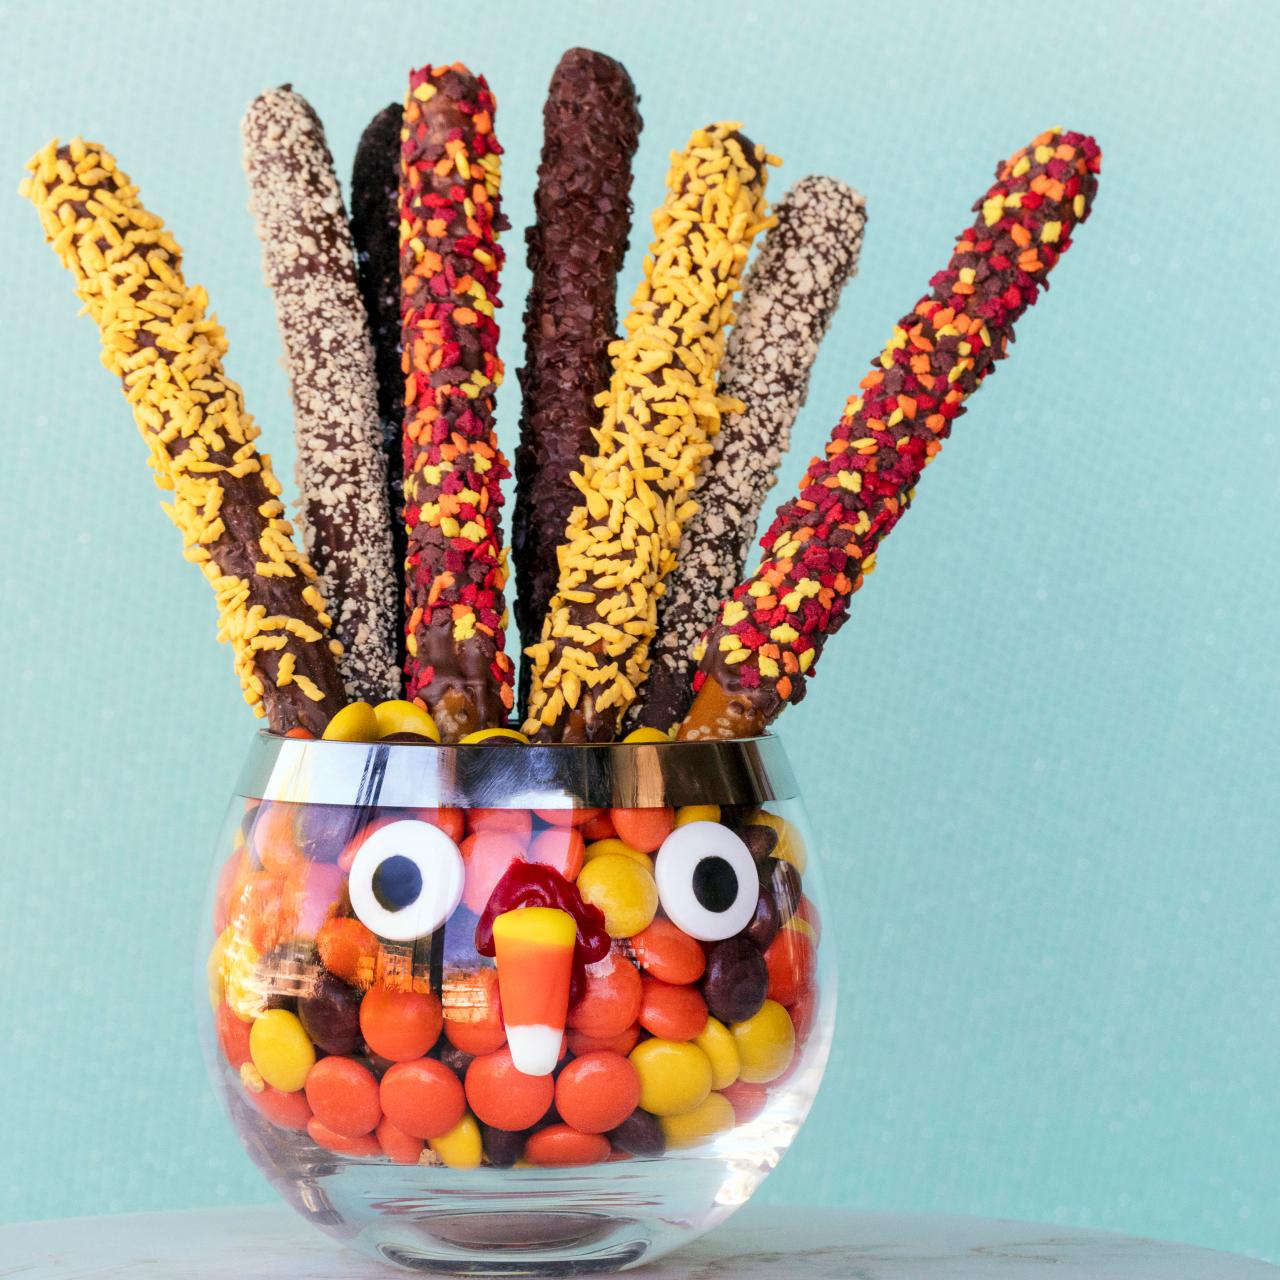 The Best Thanksgiving Crafts for 2 Year Olds - Journey to SAHM